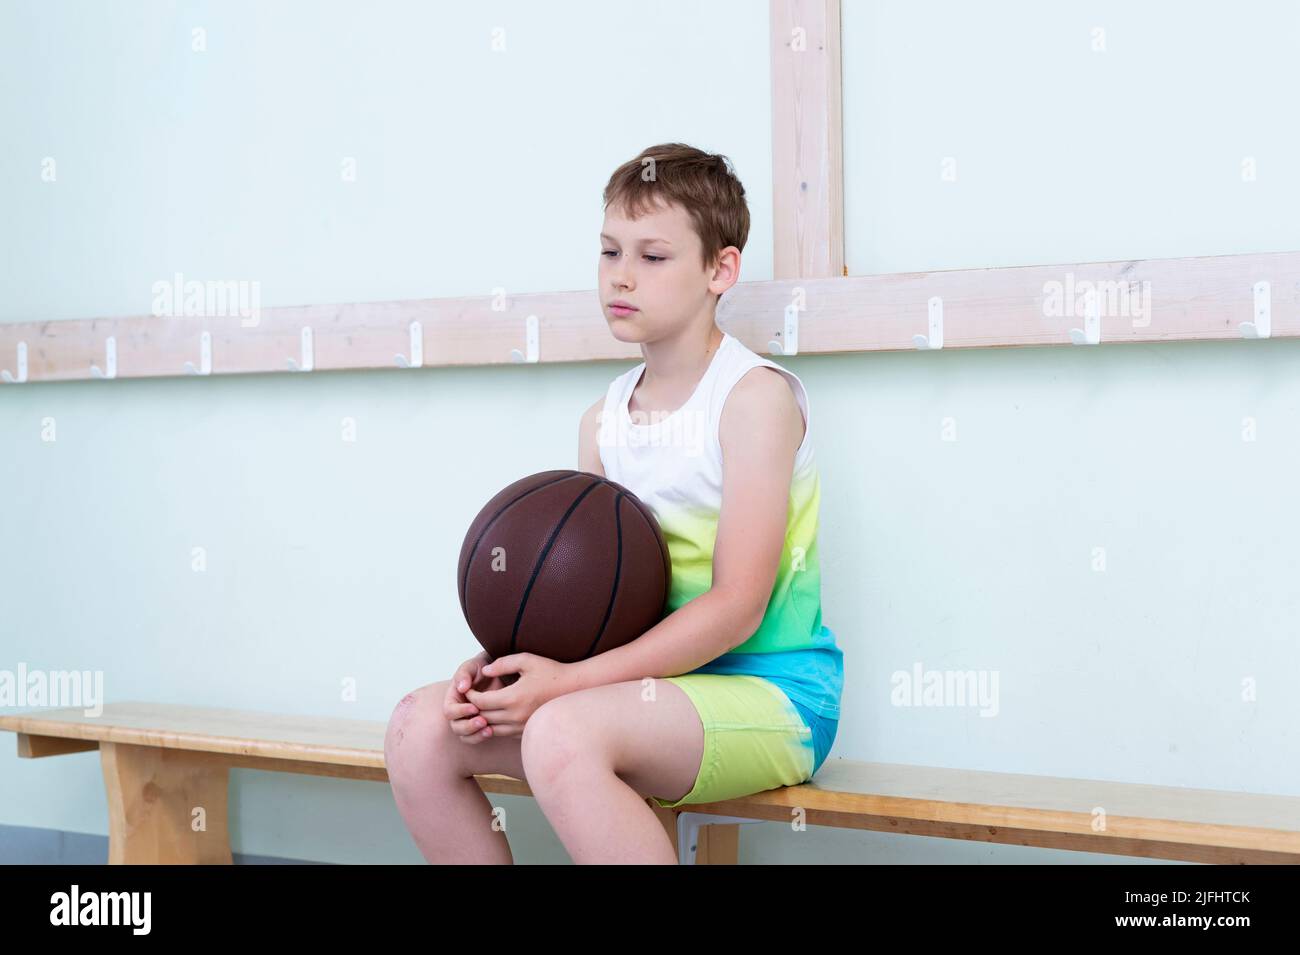 Sad disappointed boy with basketball ball in a physical education lesson Stock Photo